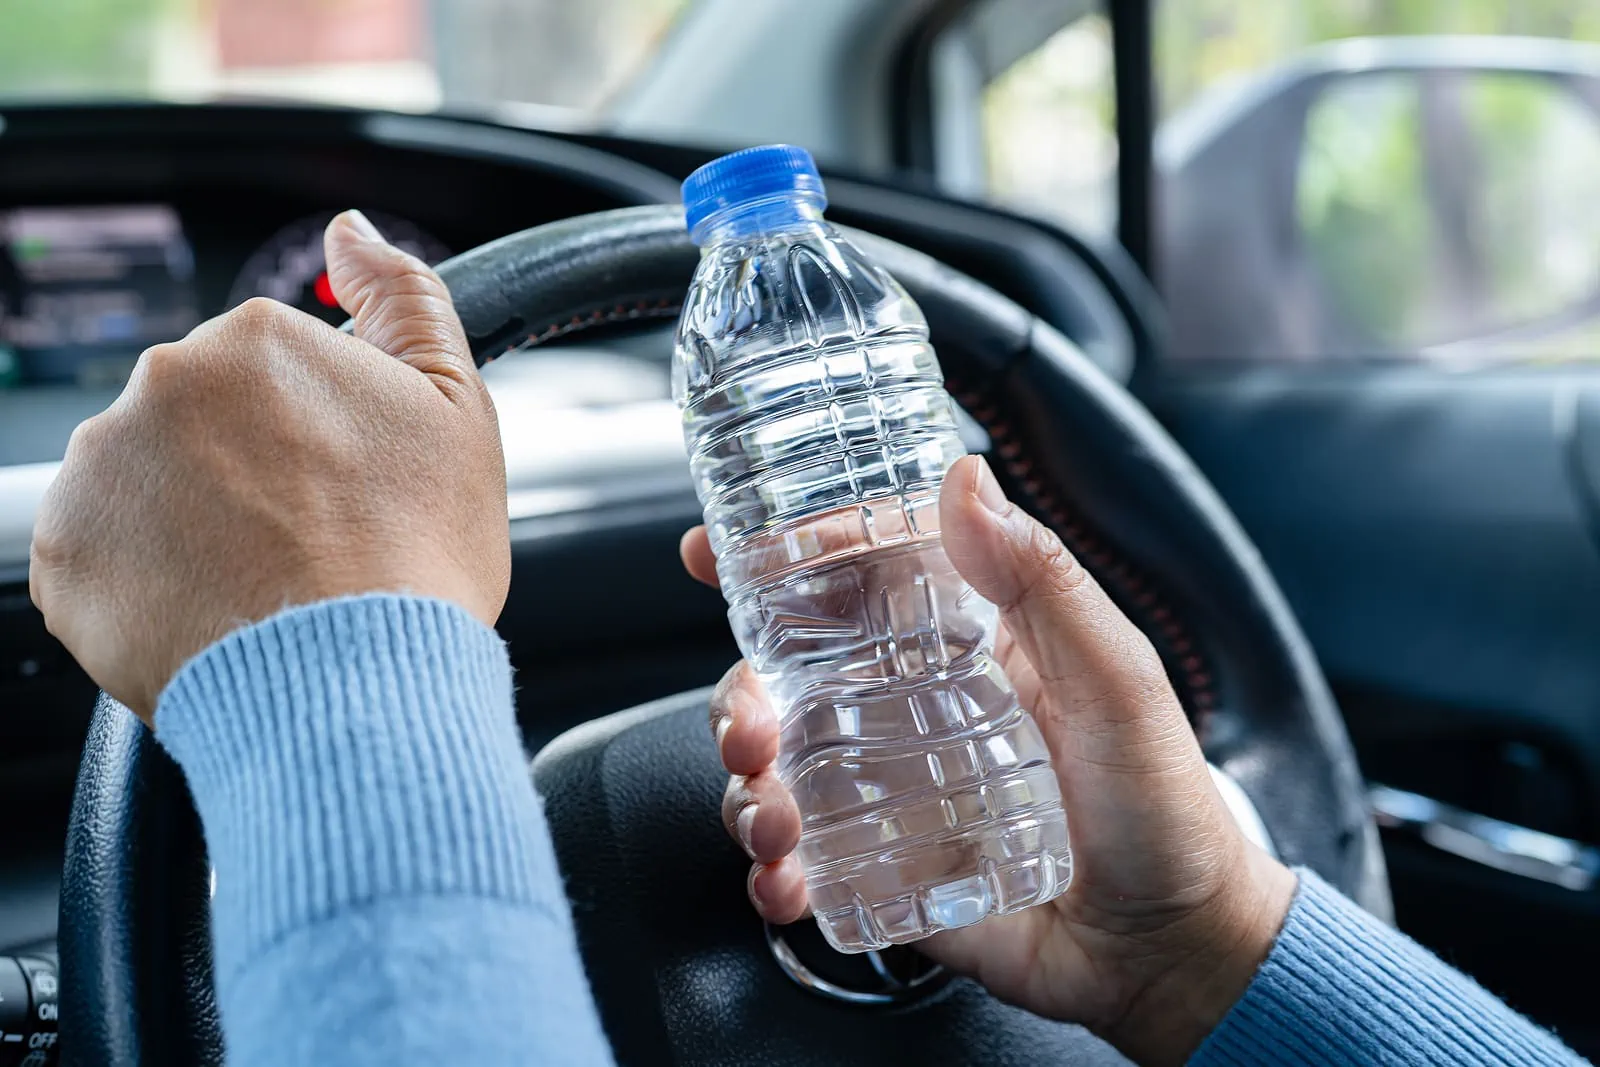 Is It Safe to Drink Bottled Water Left in a Hot Car?